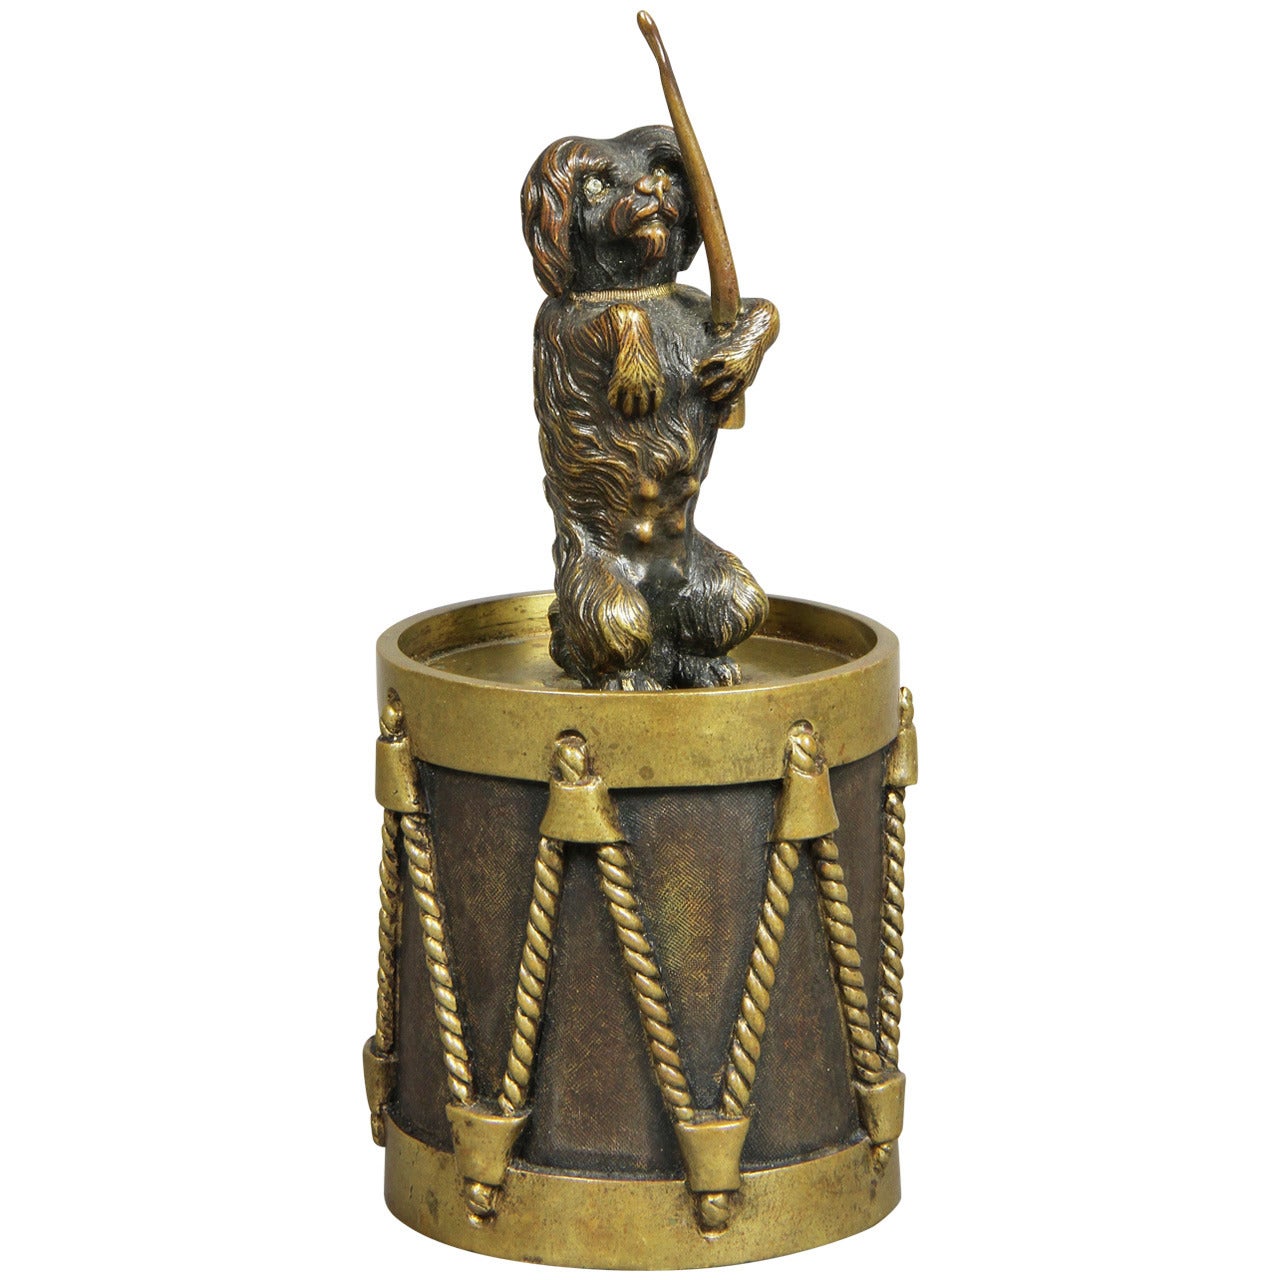 European Bronze Figure of a Dog Seated on a Drum Dinner Bell